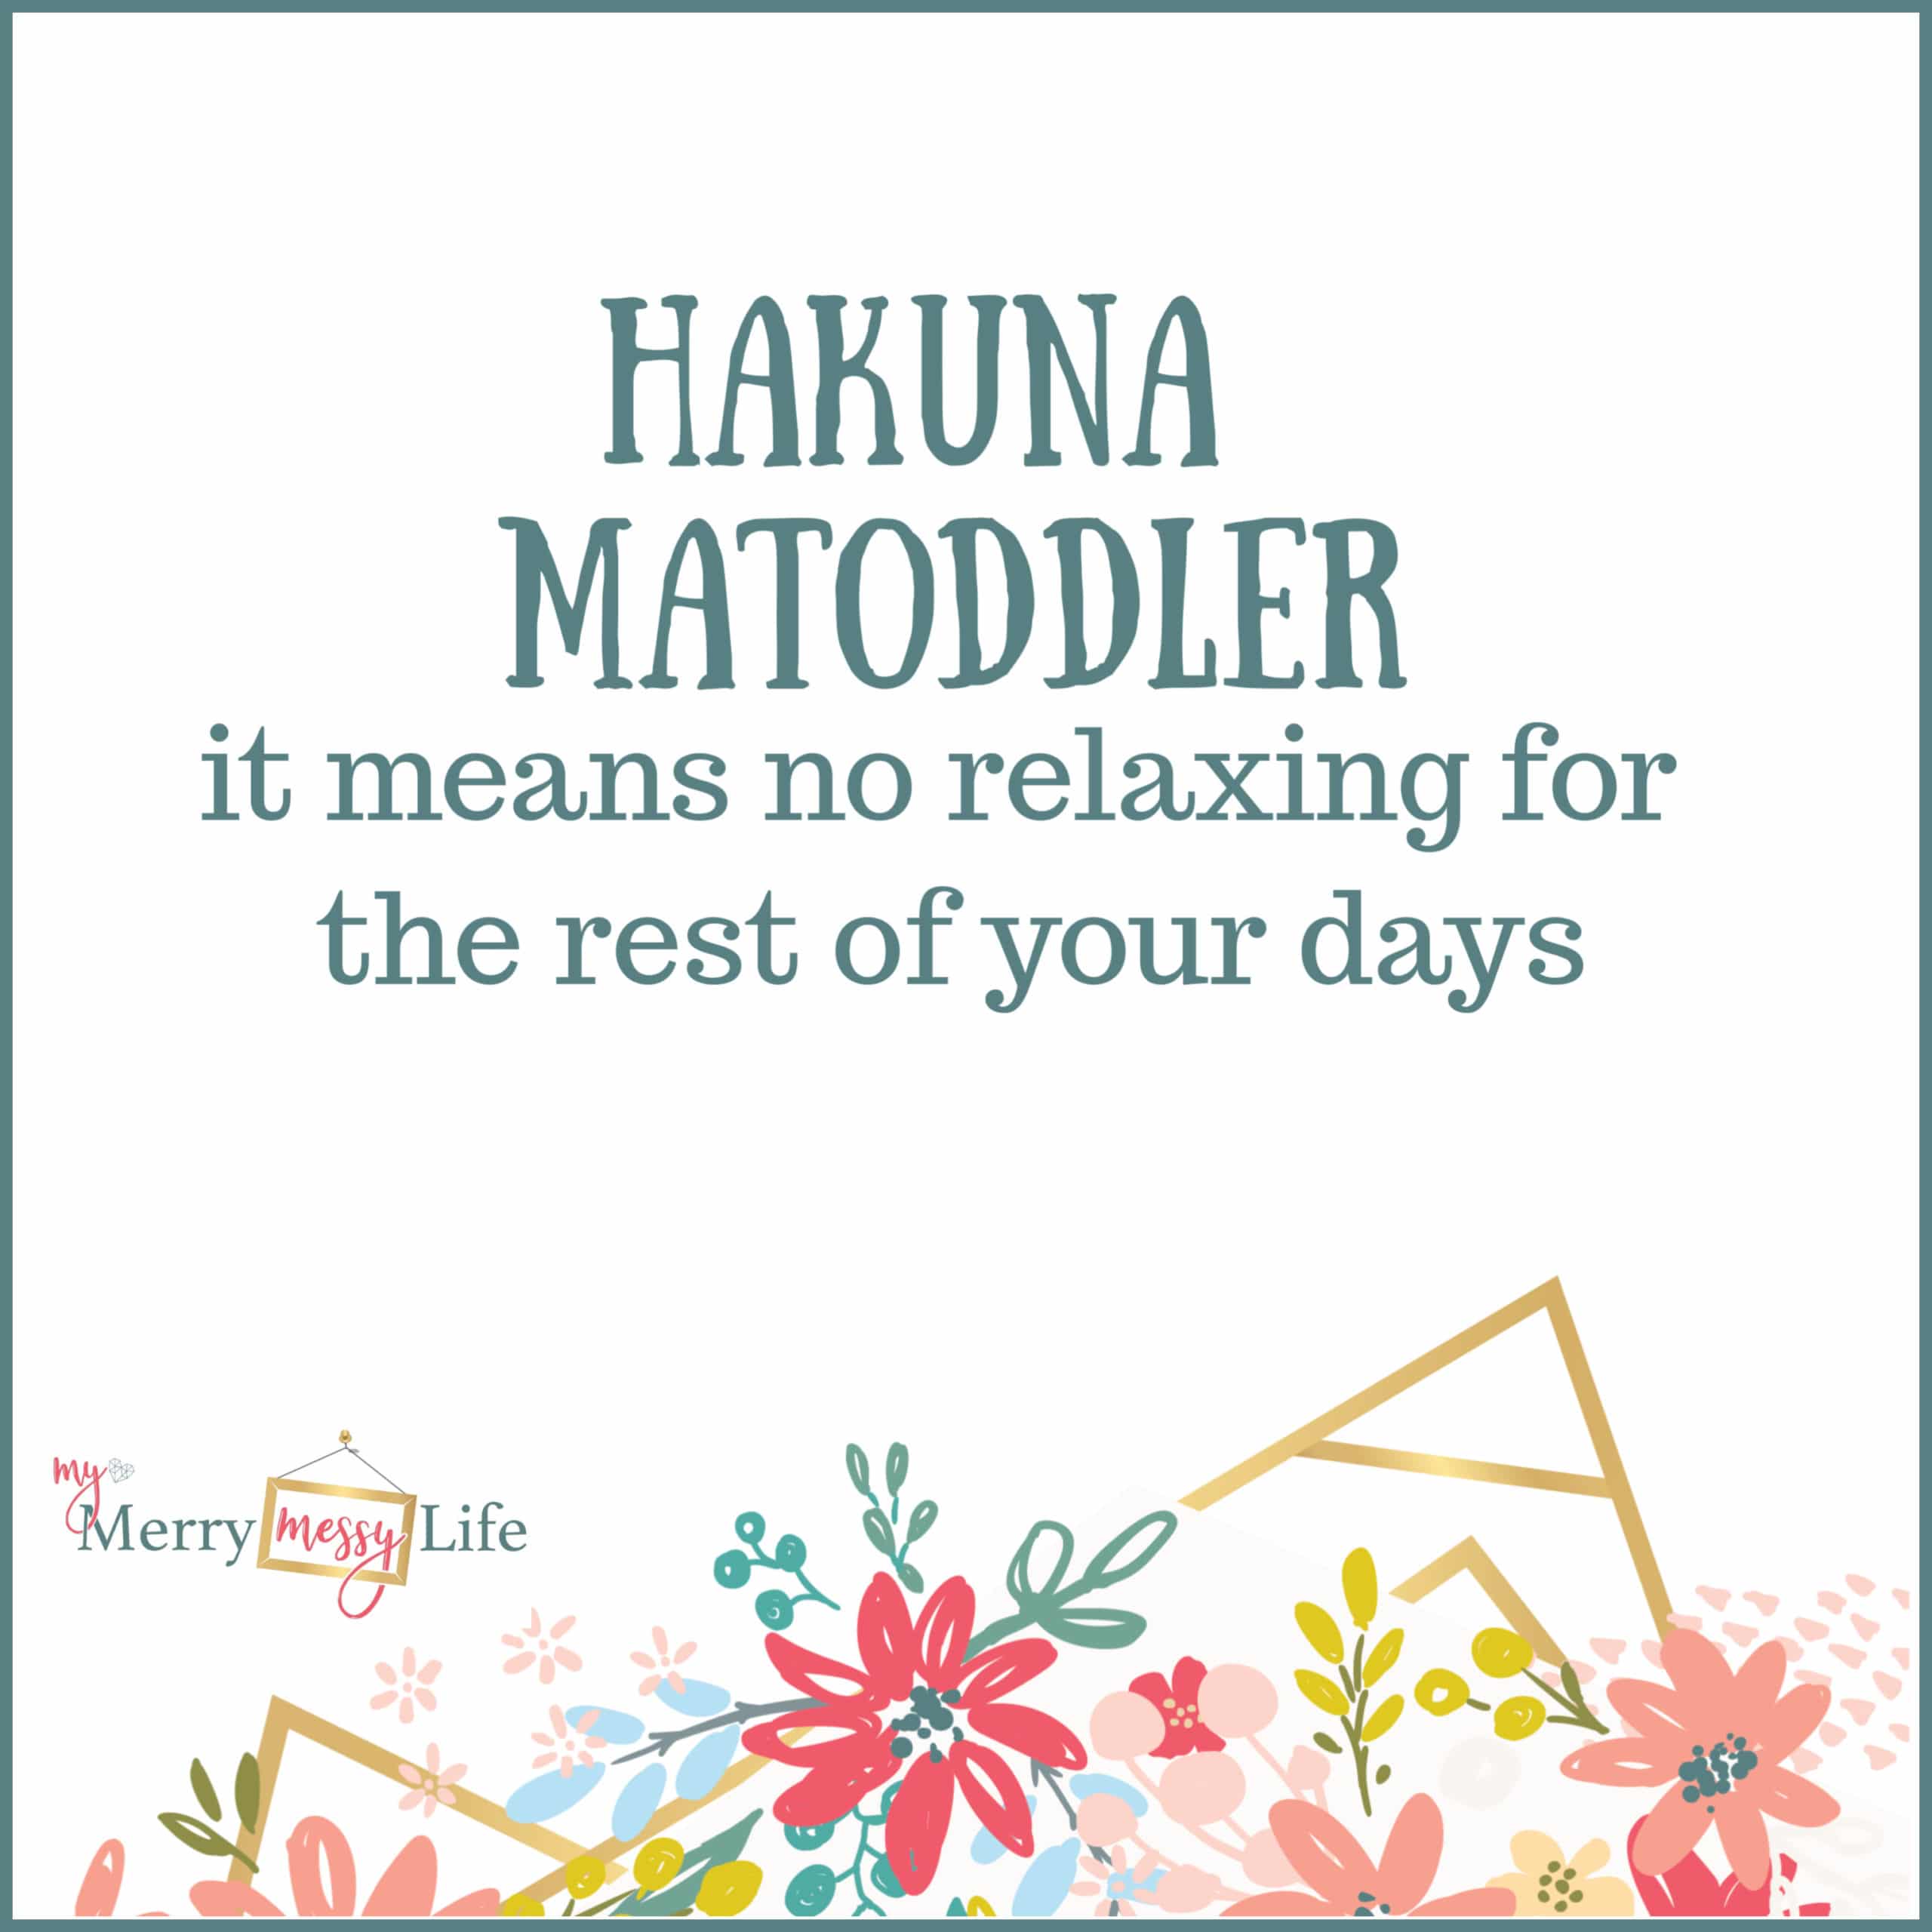 Hakuna Matoddler - it means no relaxing for the rest of your days. Funny Mom Memes about Toddlers